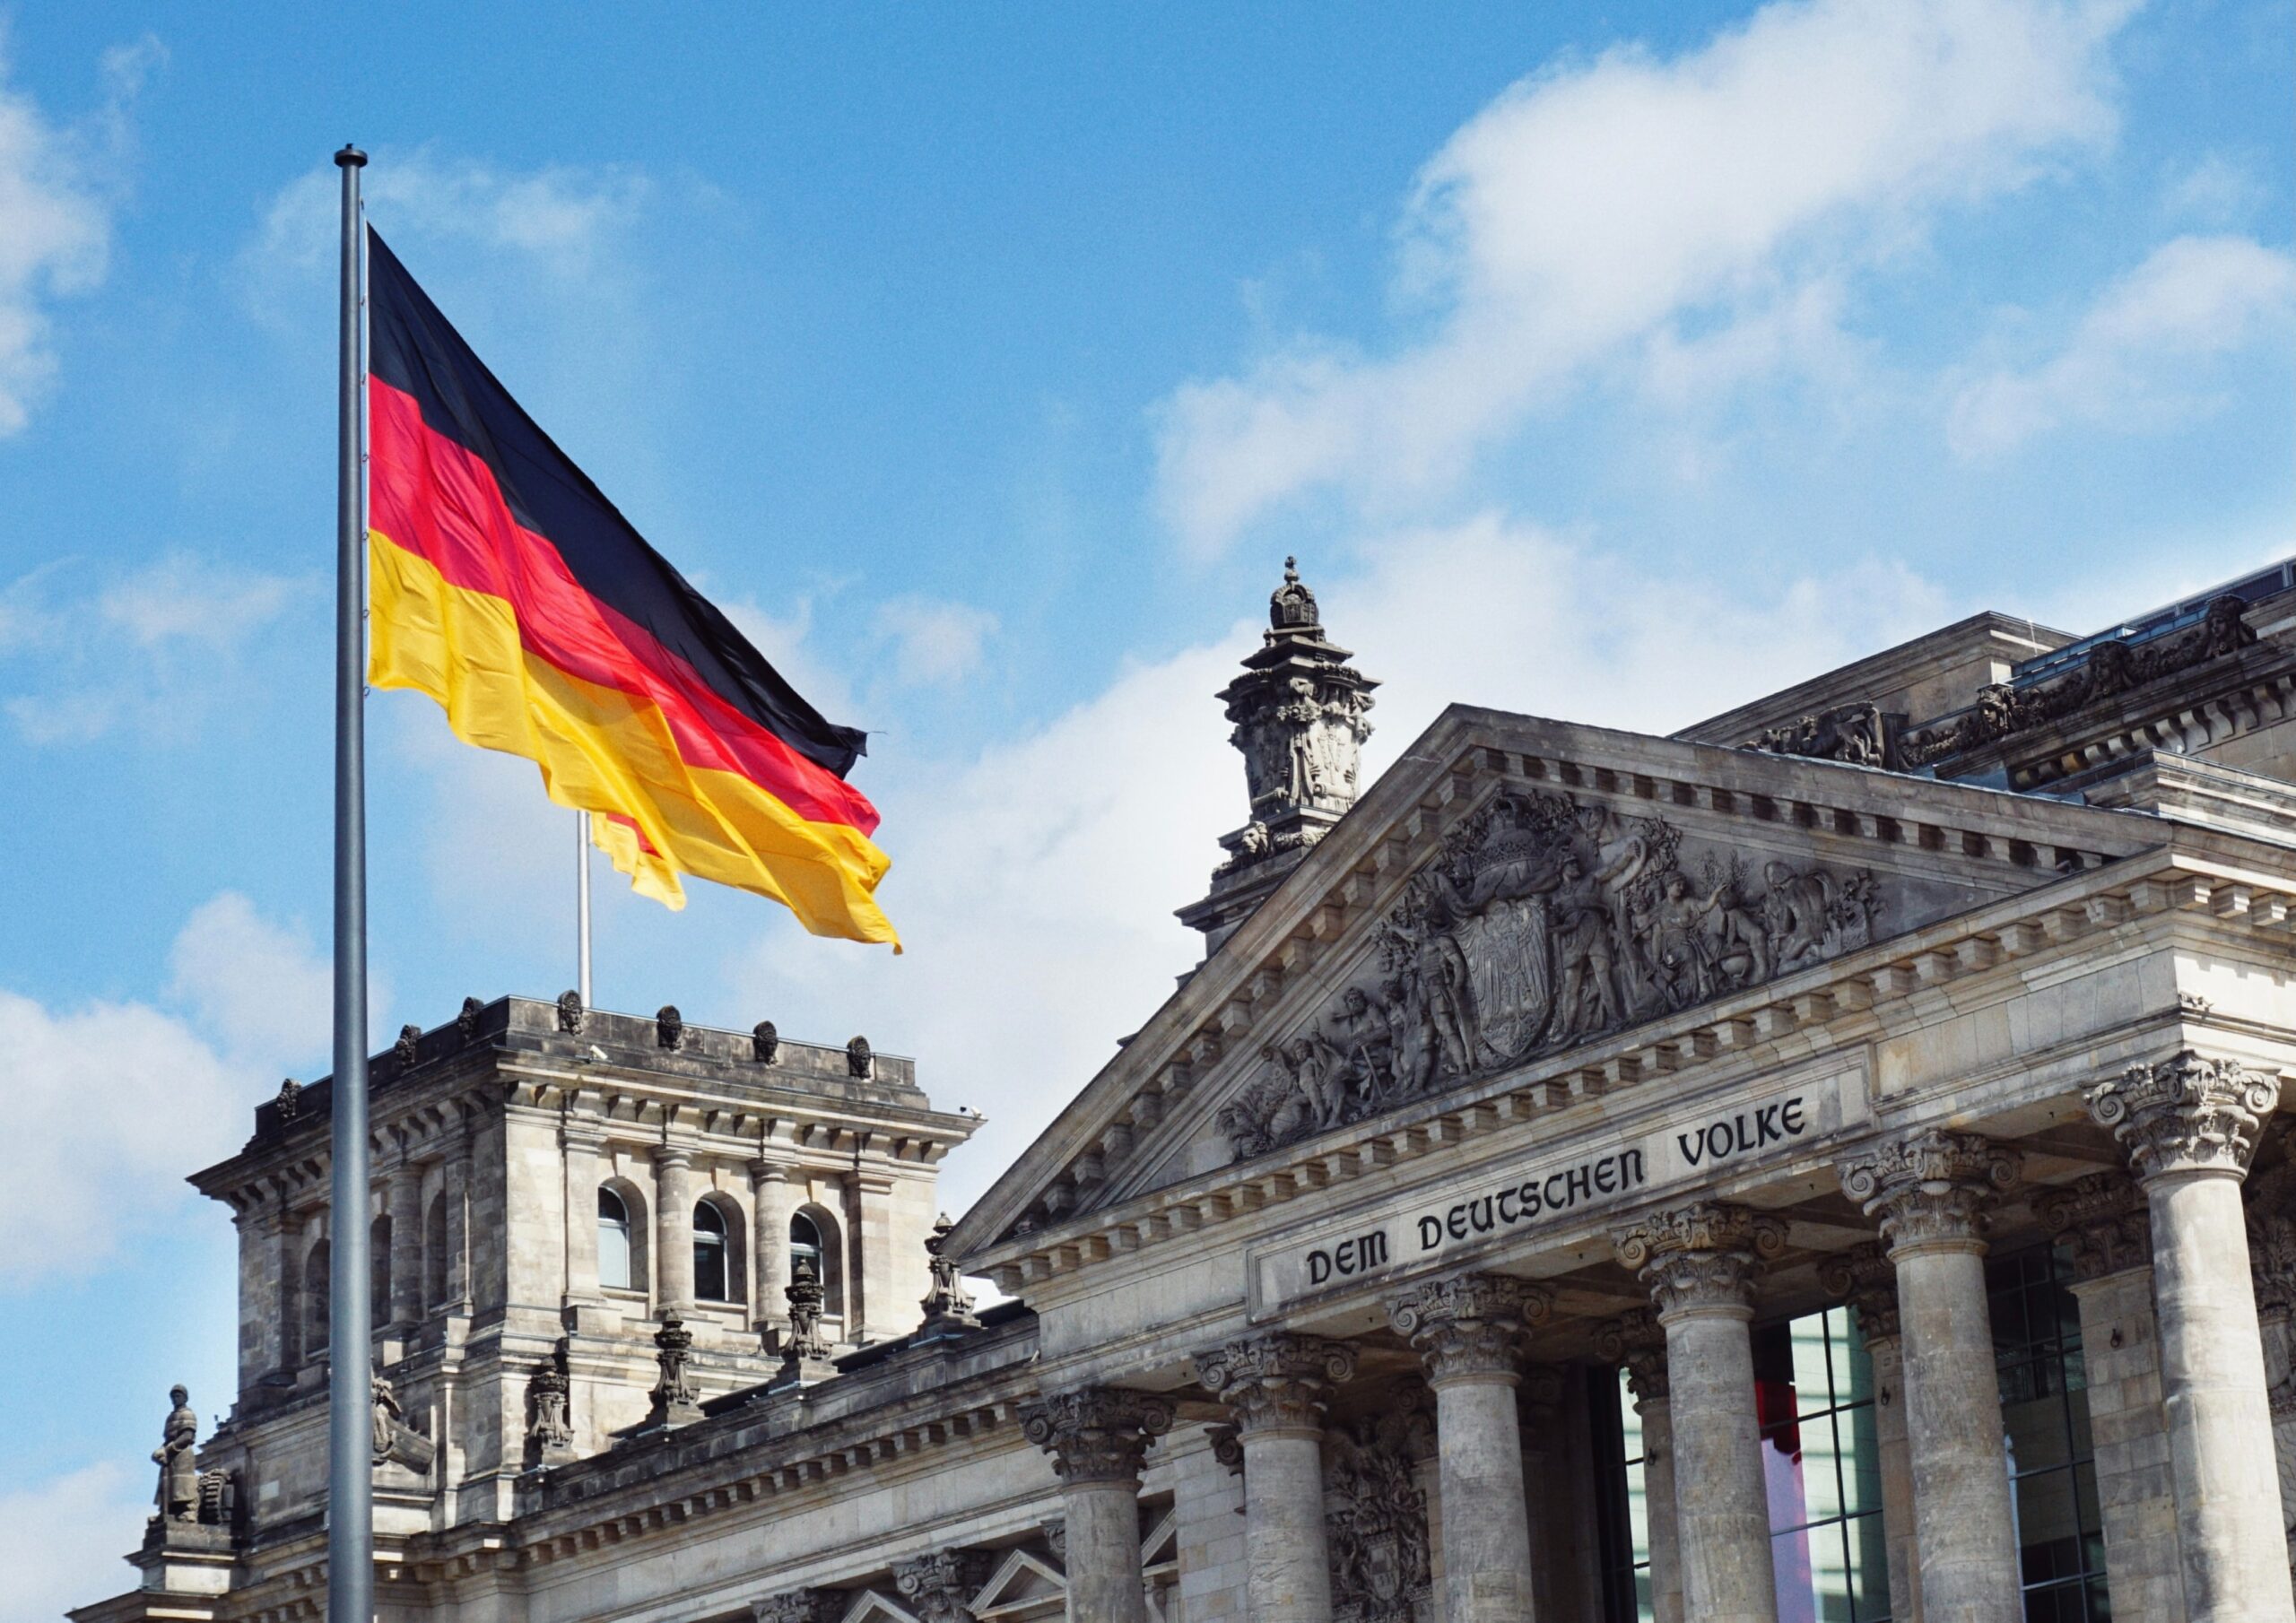 Parliament in Berlin, Germany, with the German flag in the wind